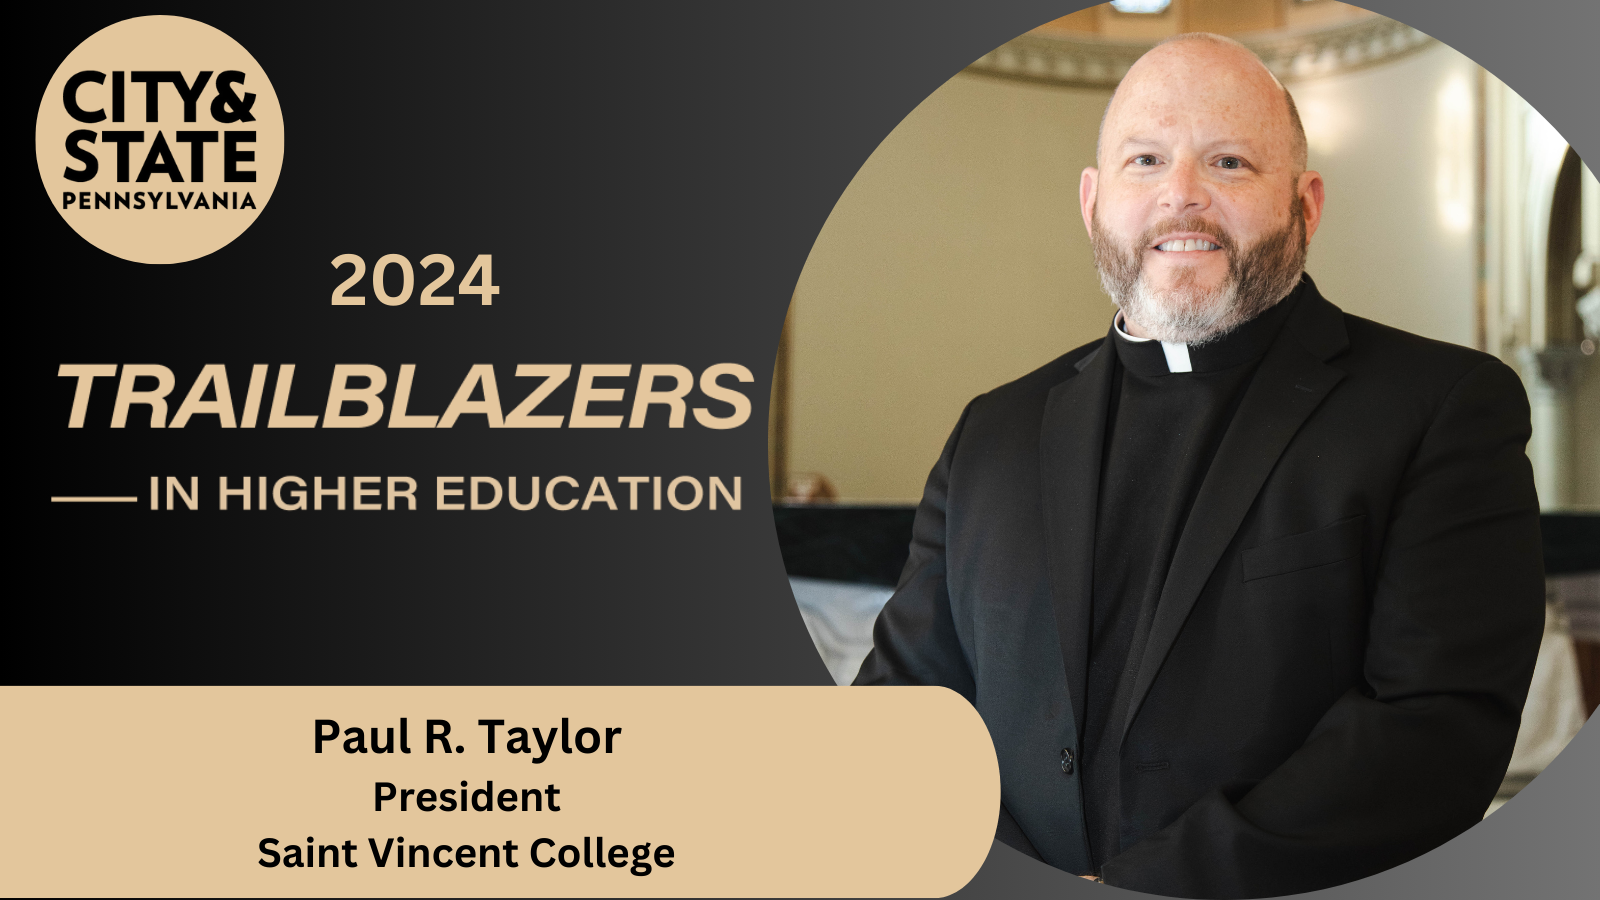 Fr. Paul Taylor and the Trailblazers in Higher Education logo